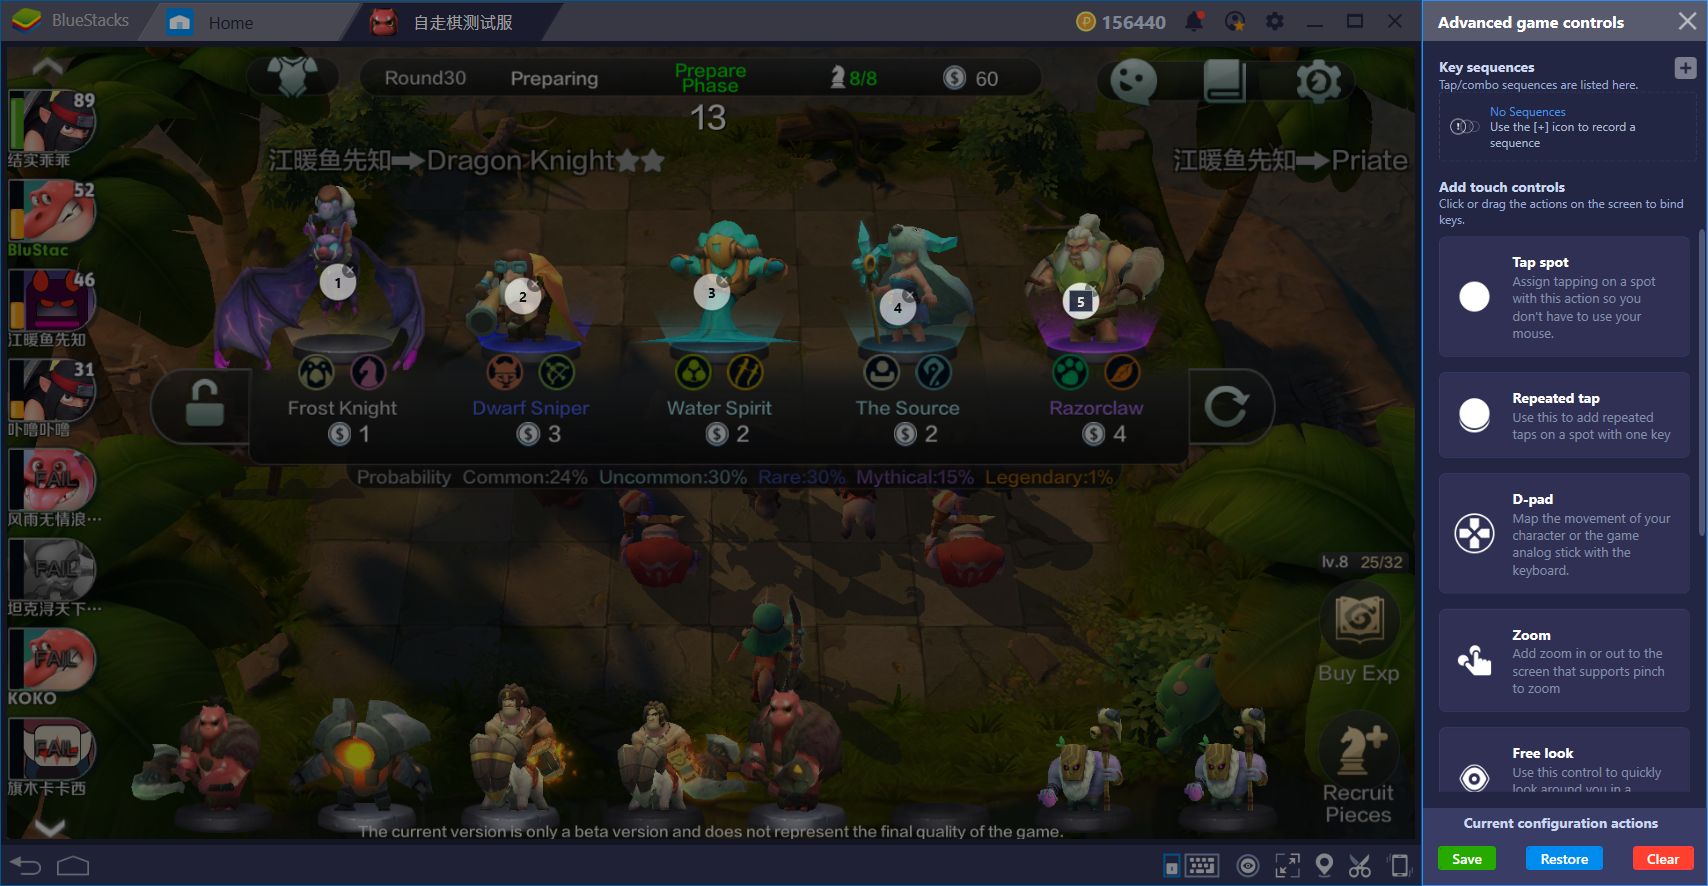 How to Play Auto Chess Mobile on PC with Mouse Guide 2021-Game  Guides-LDPlayer